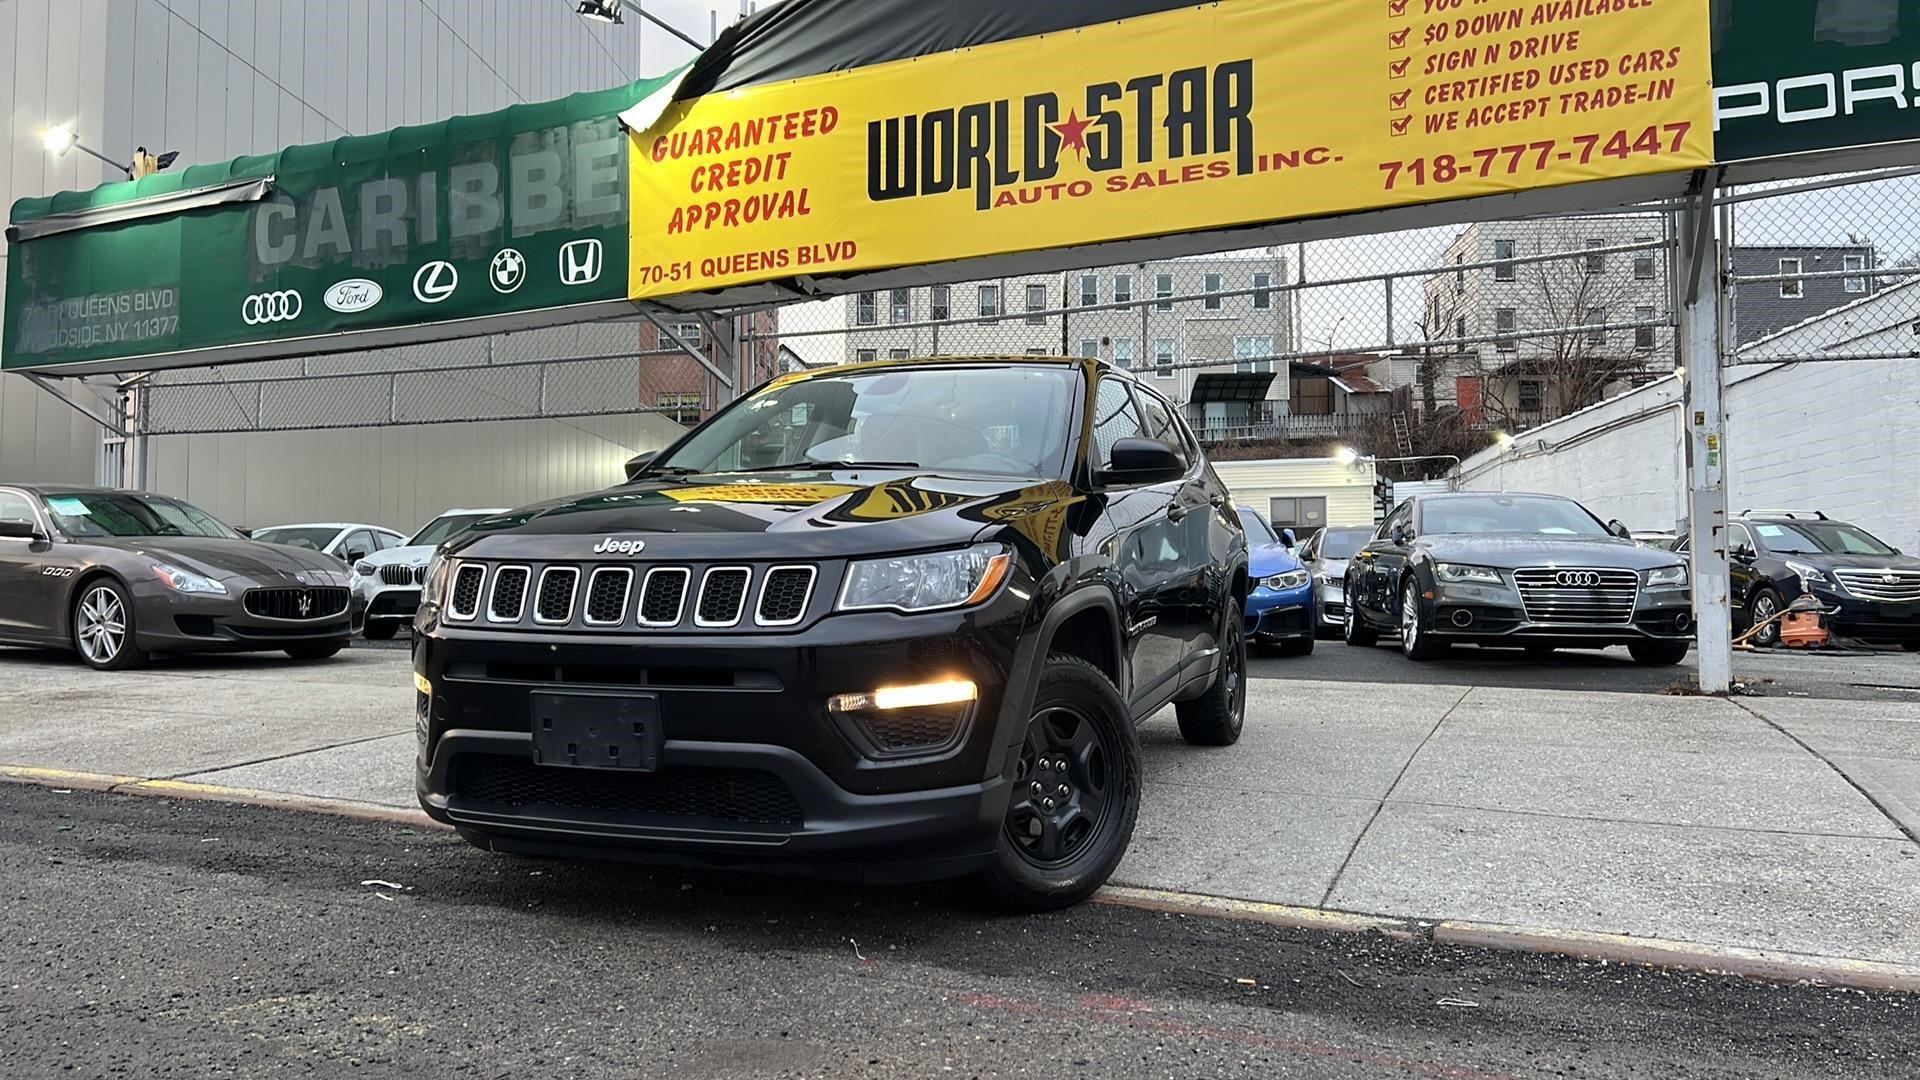 used cars in Queens and Woodside